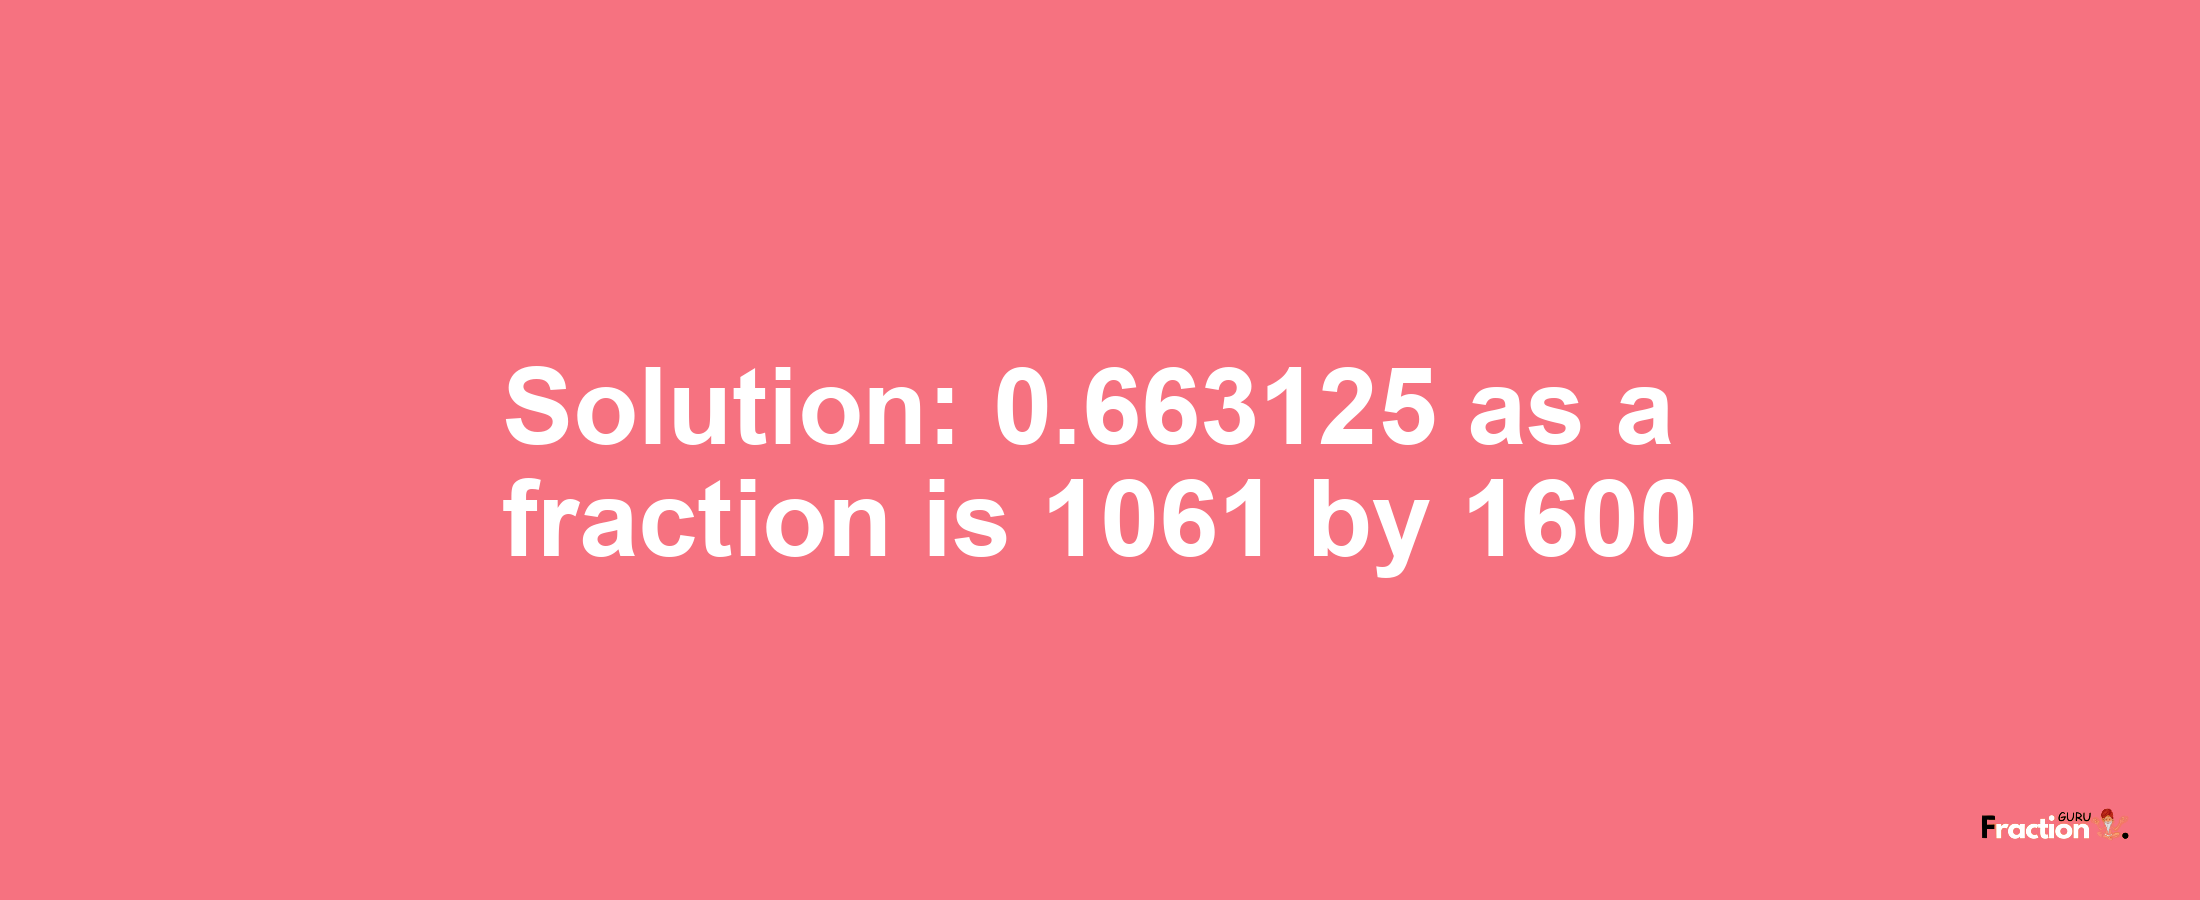 Solution:0.663125 as a fraction is 1061/1600